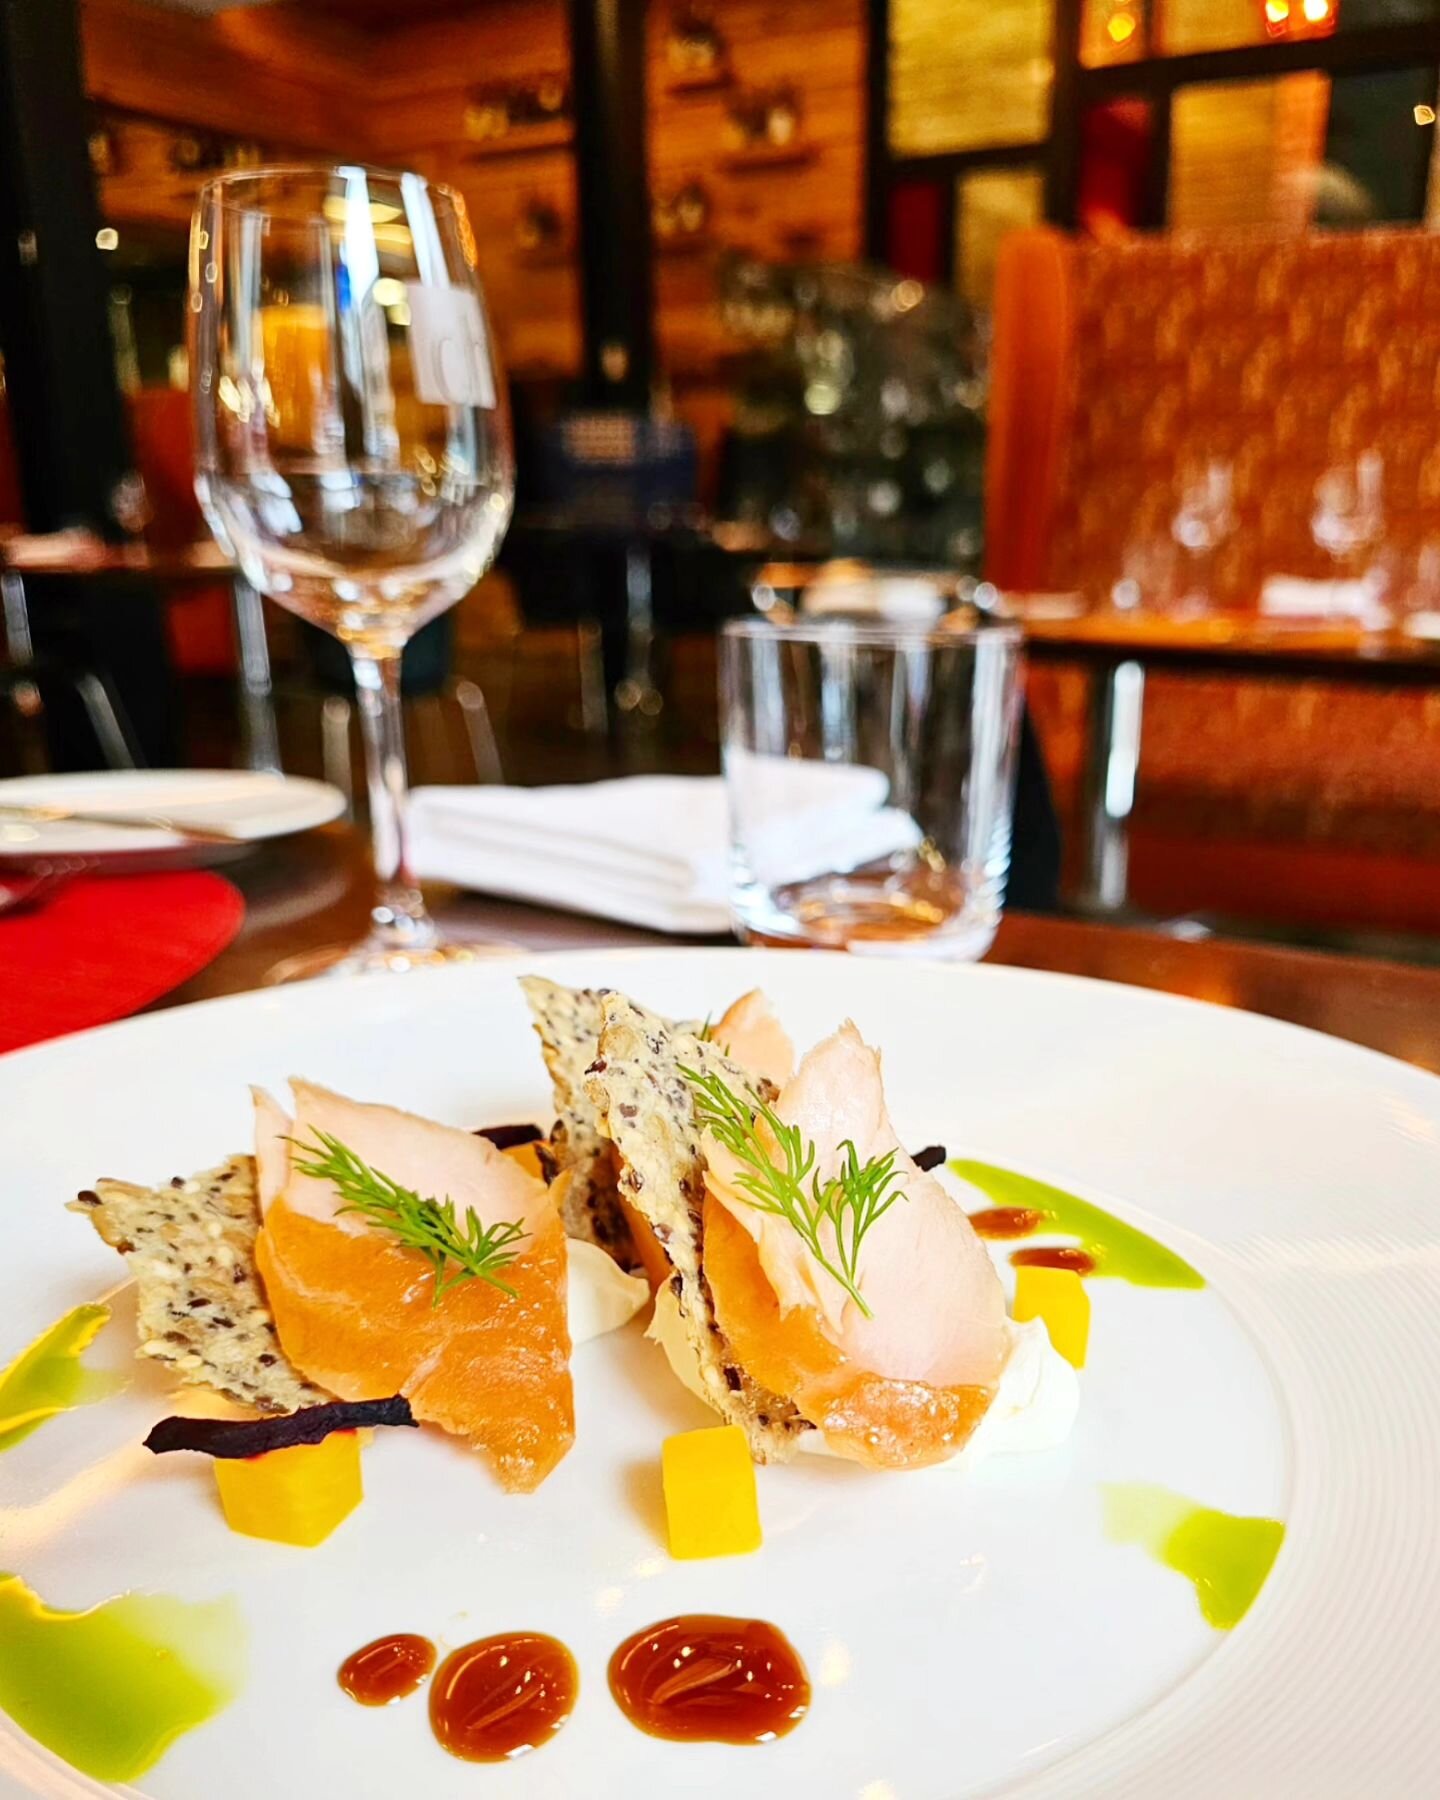 Malt Glazed Smoked Salmon
~Cr&egrave;me Fraiche, Kn&auml;ckebr&ouml;d, Beets

A student-run, fine dining experience, located in the heart of downtown Toronto 

Book your reservation at opentable.ca
.
.
.
.
.
.
.
.
.
.
#thechefshouse #georgebrowncolle